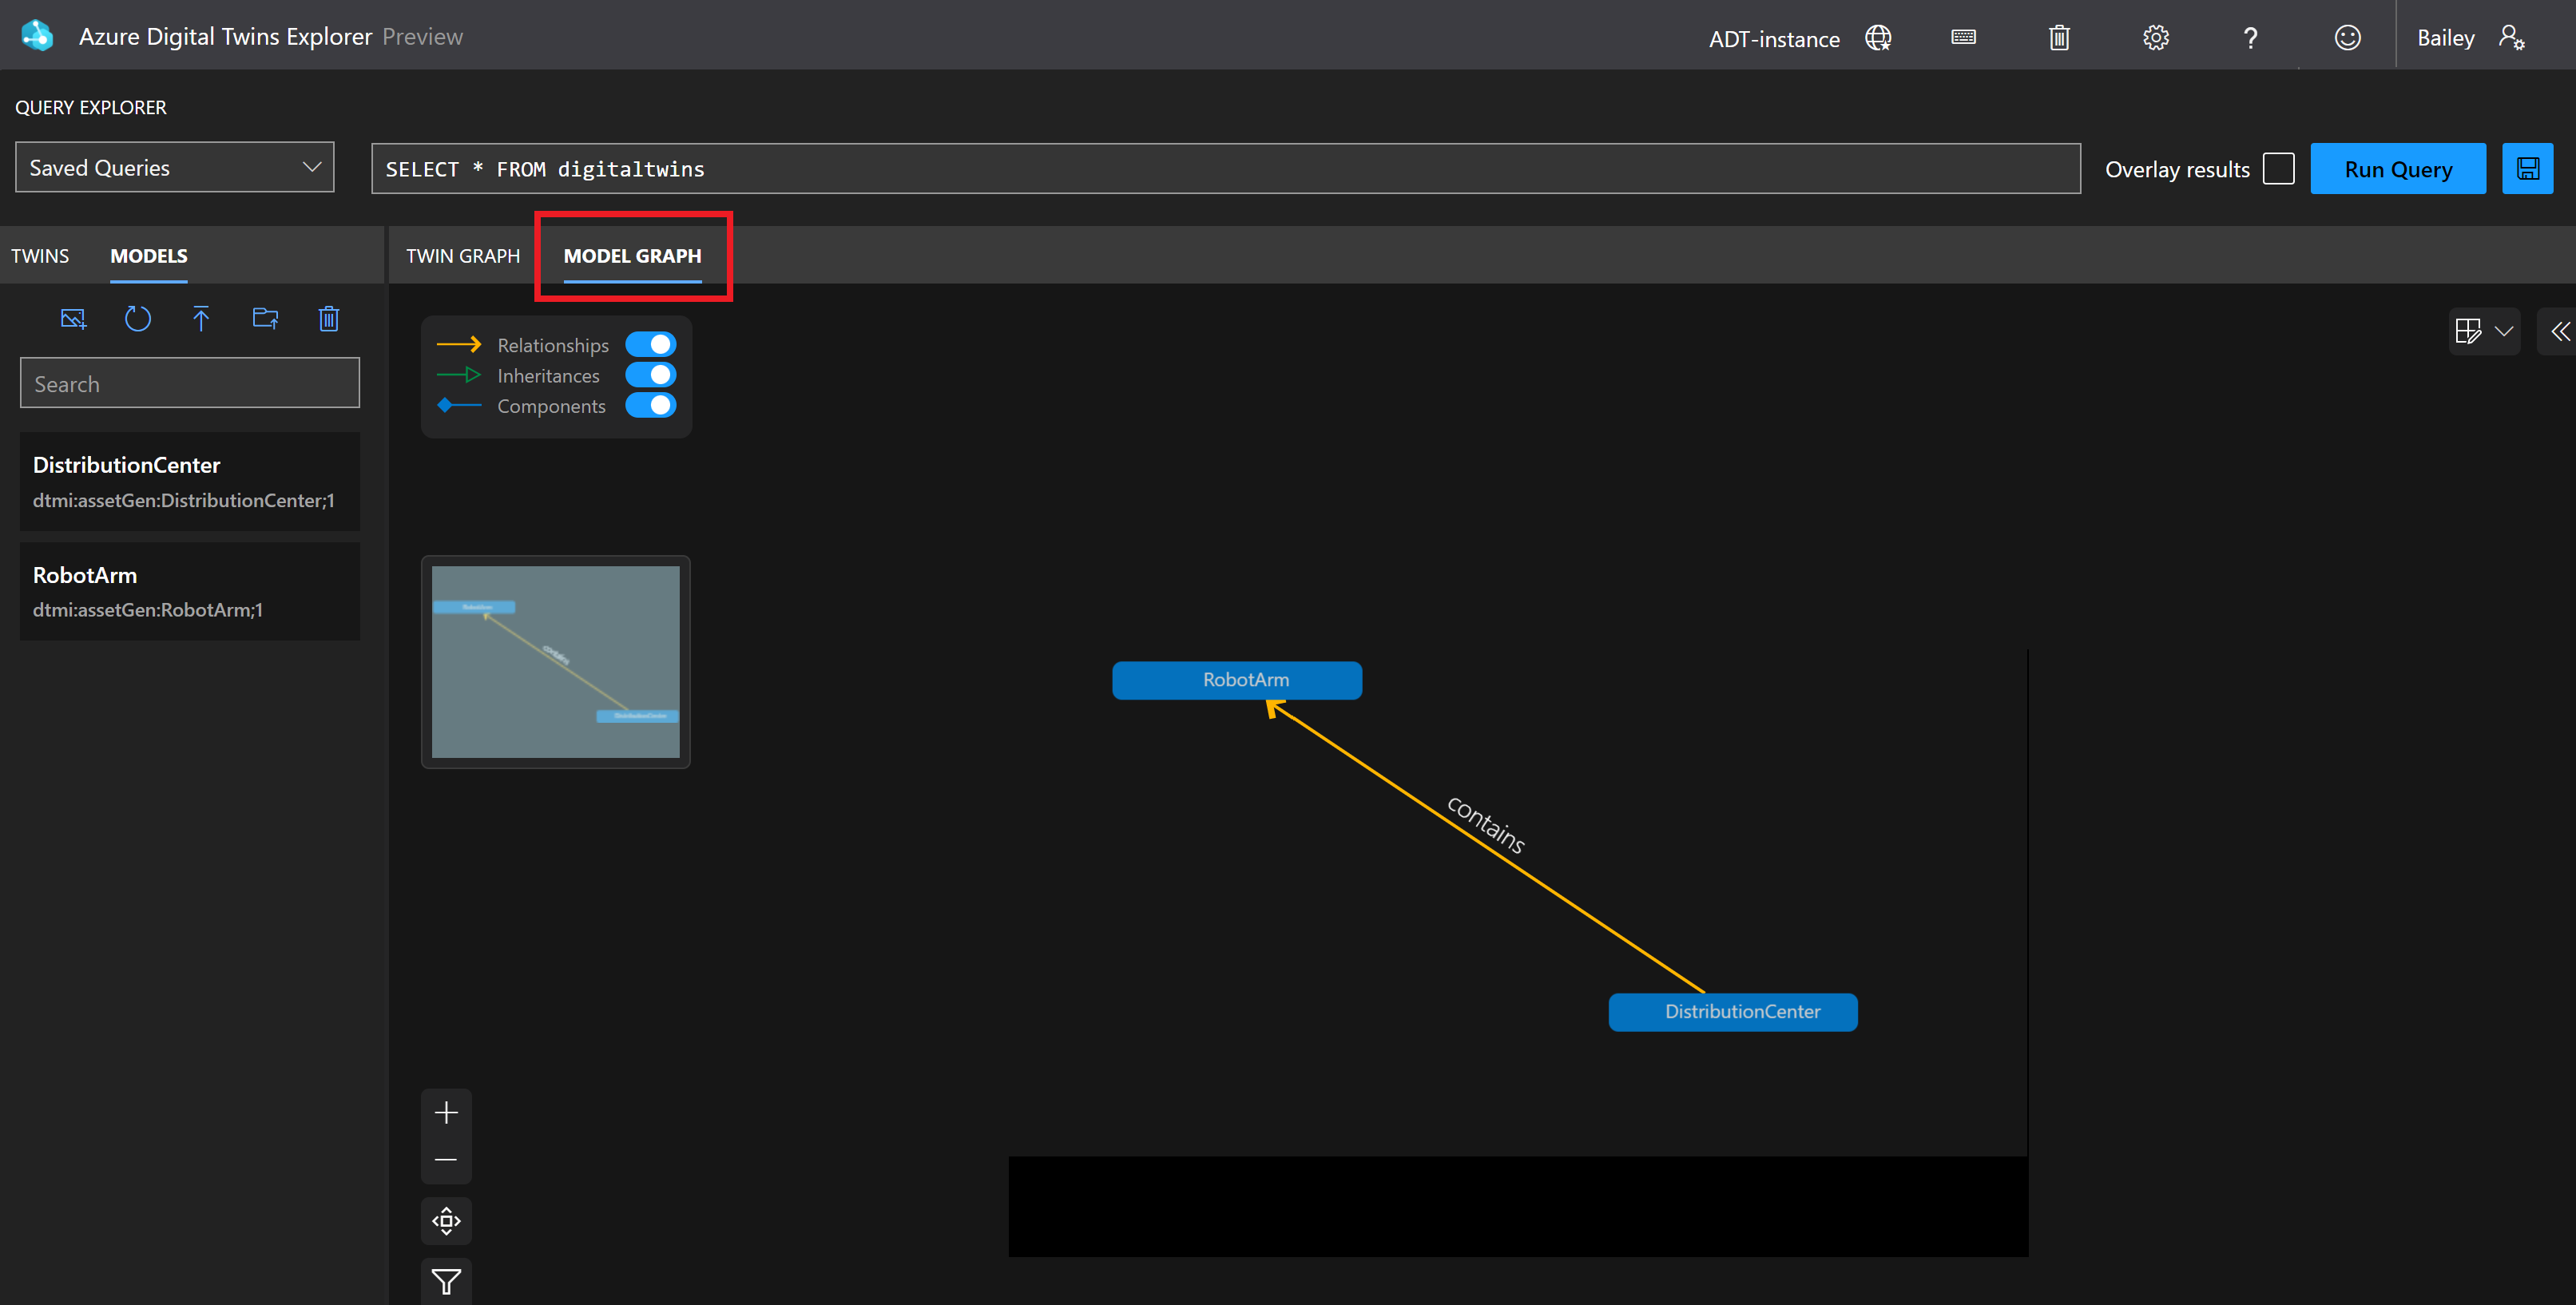 Screenshot of the Azure Digital Twins Explorer highlighting the Model Graph button for the view pane.